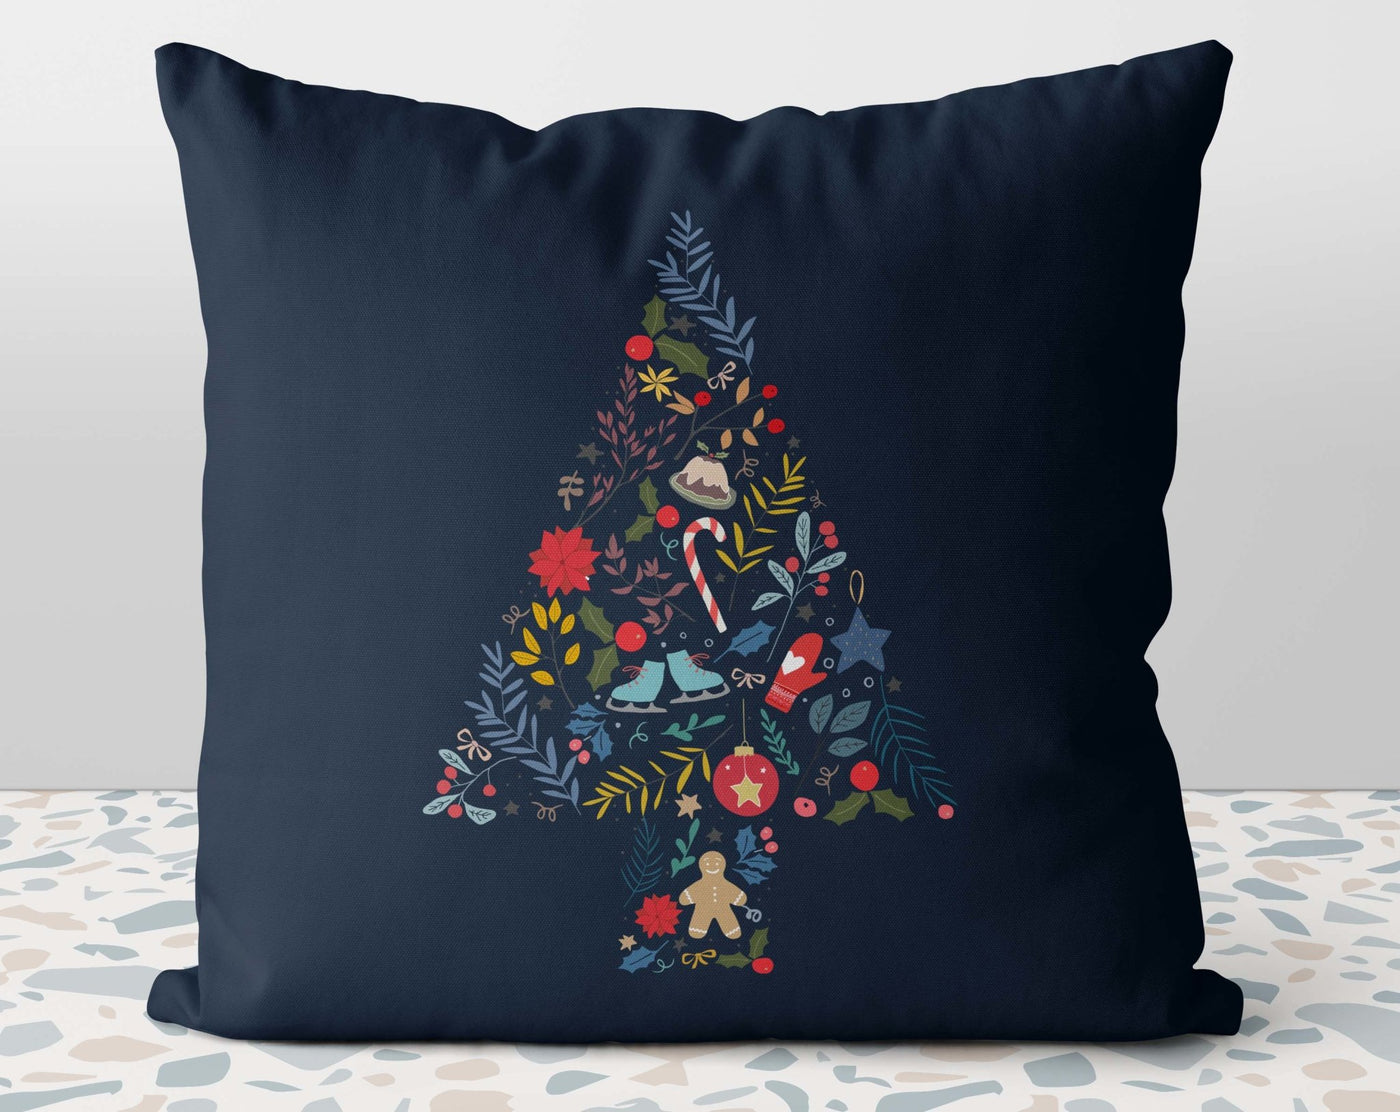 Traditional Christmas Tree Montage Pillow Throw Cover with Insert - Cush Potato Pillows